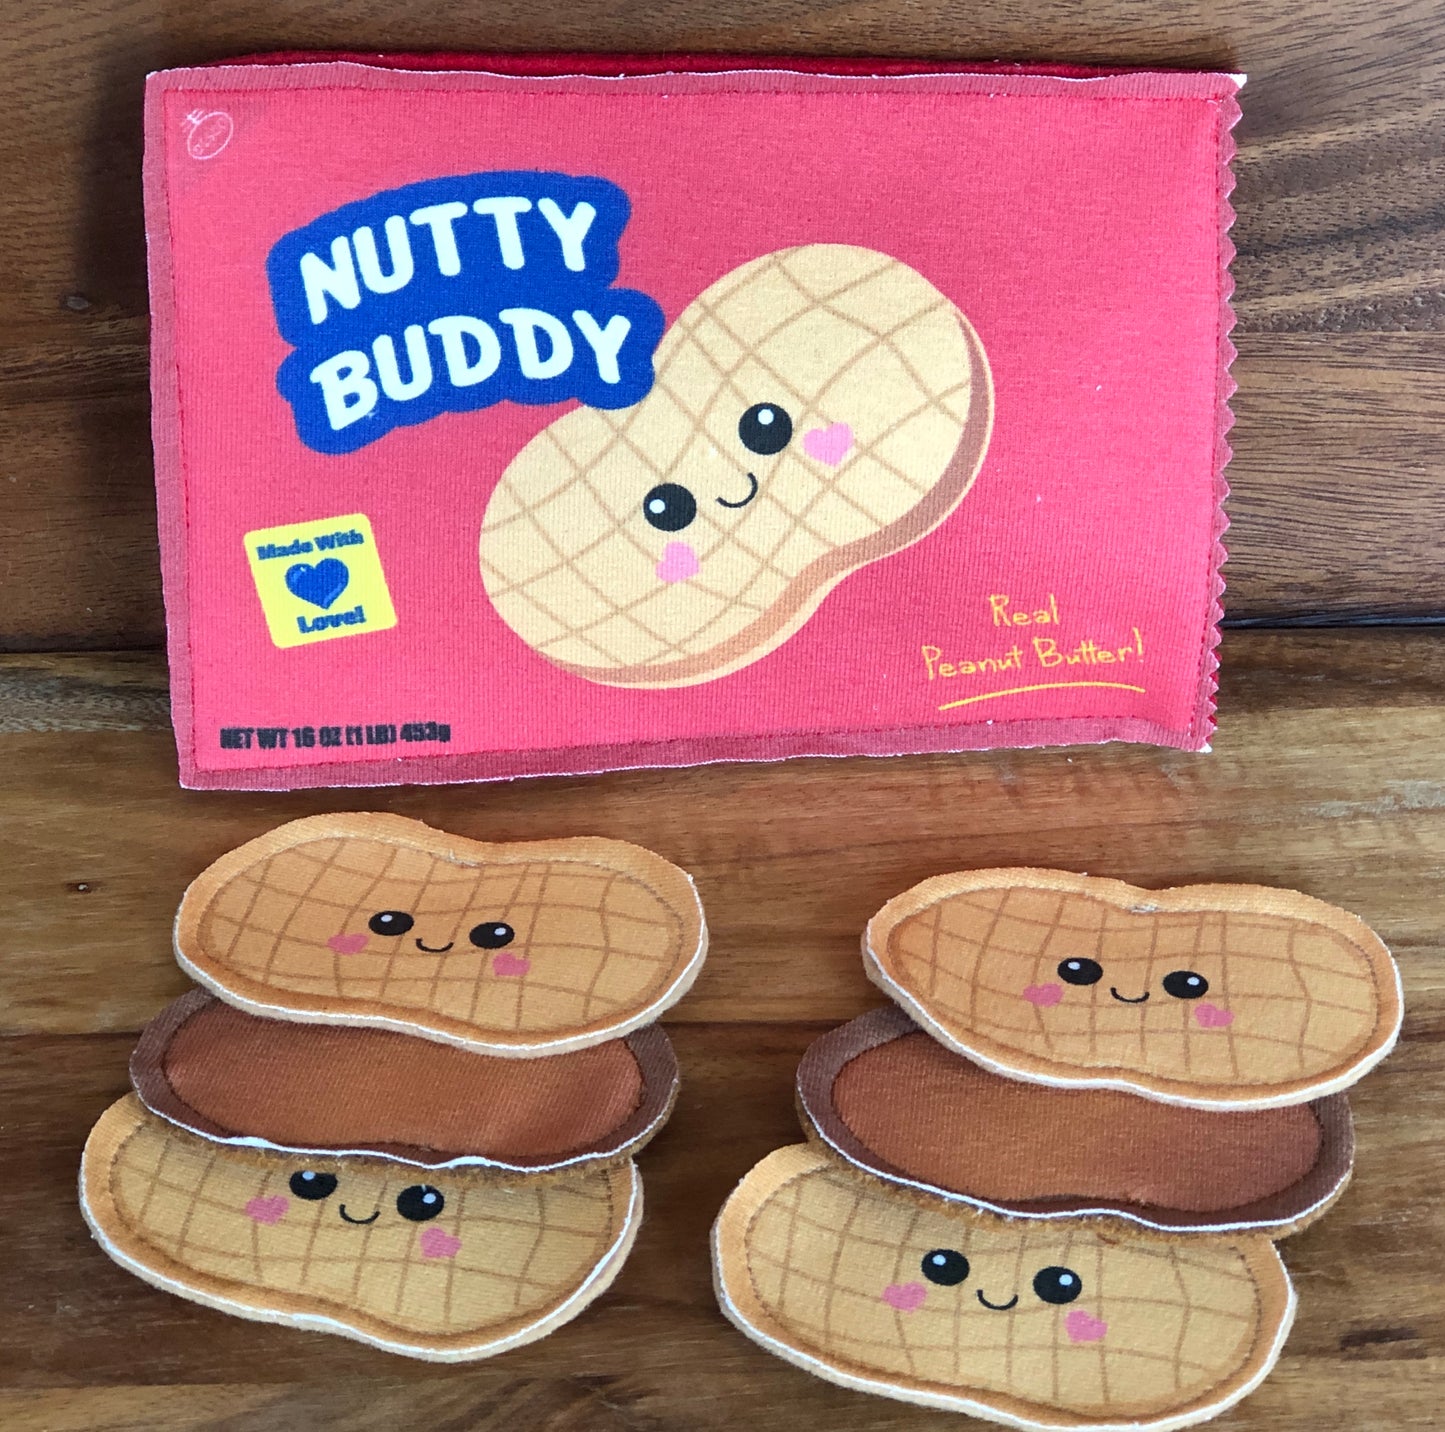 Nutty Buddy Cookies panel